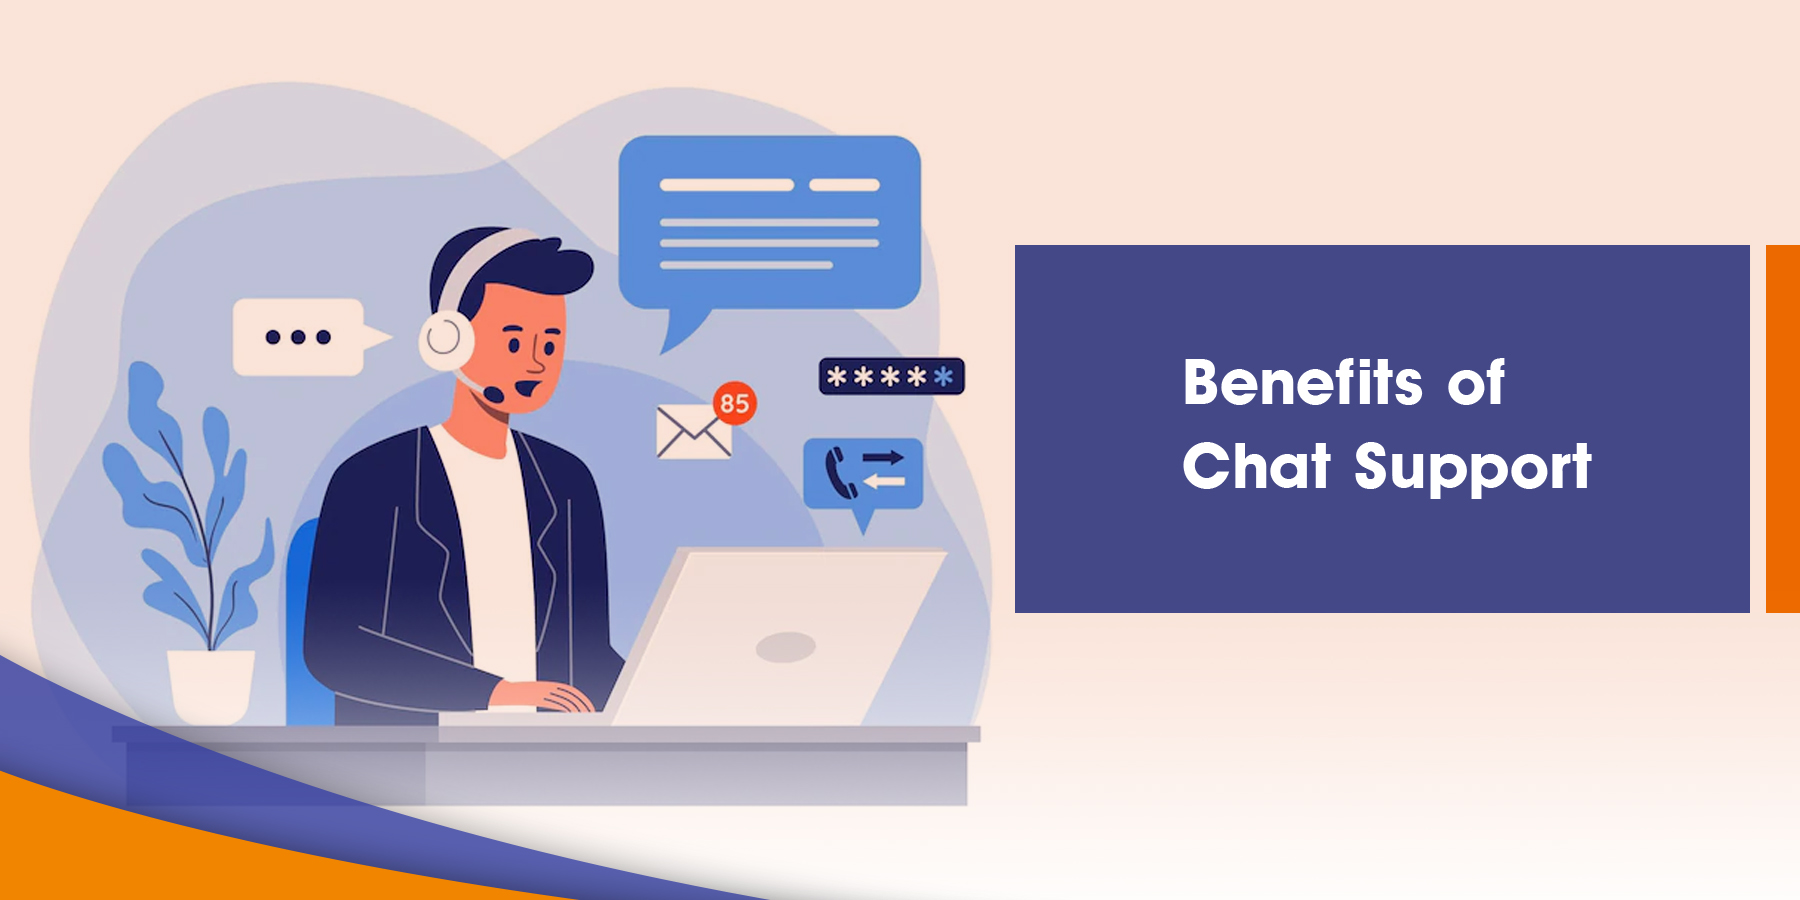 Benefits of Chat Support